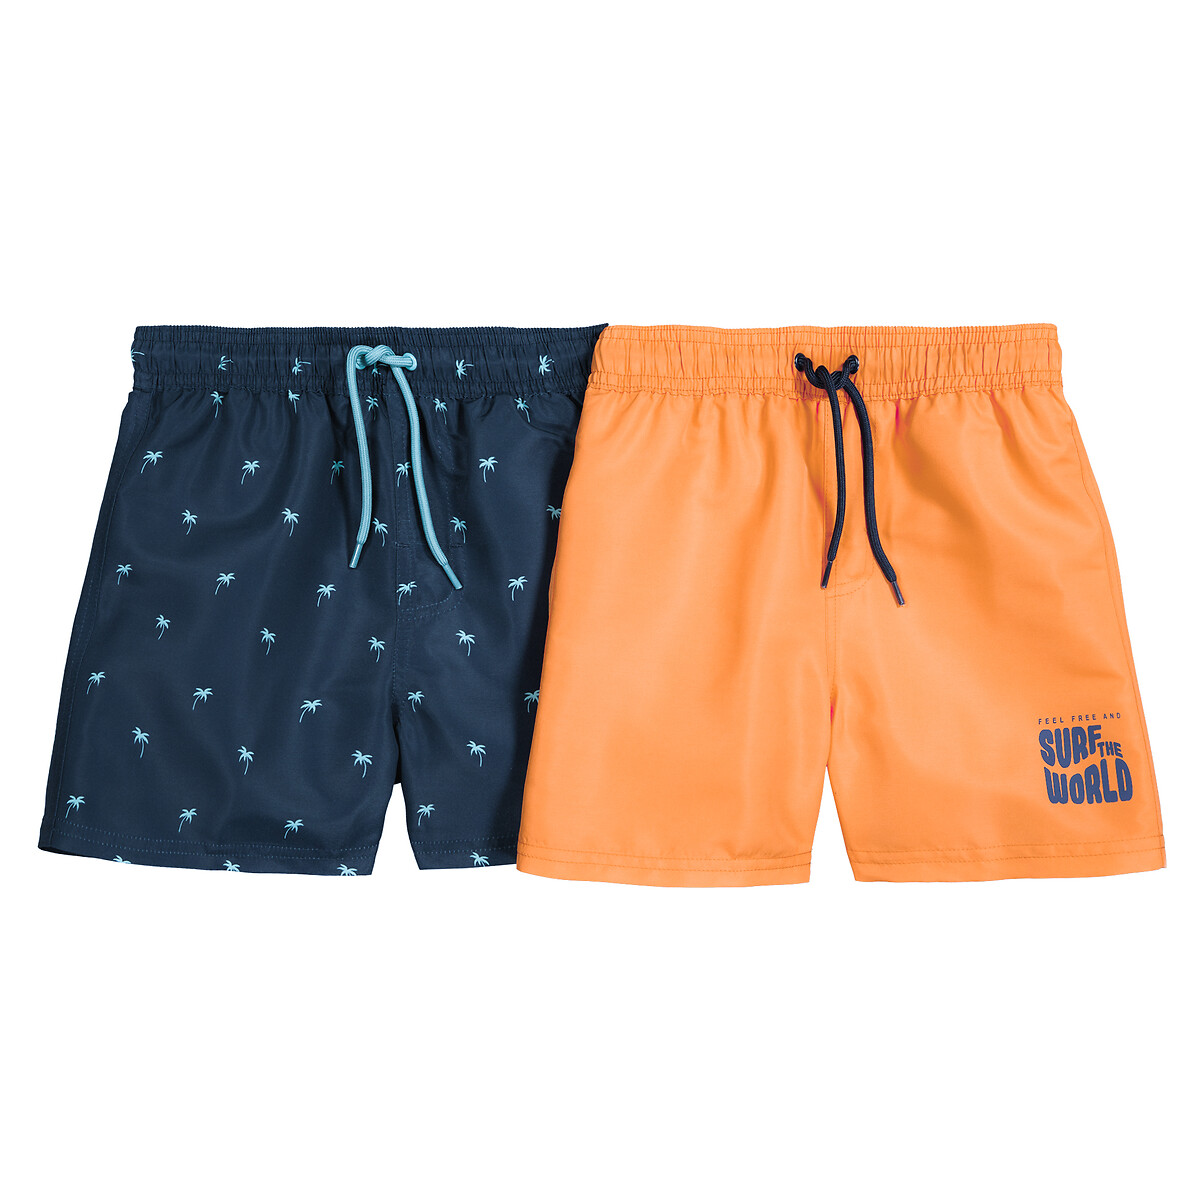 2er-Pack Badeshorts von LA REDOUTE COLLECTIONS